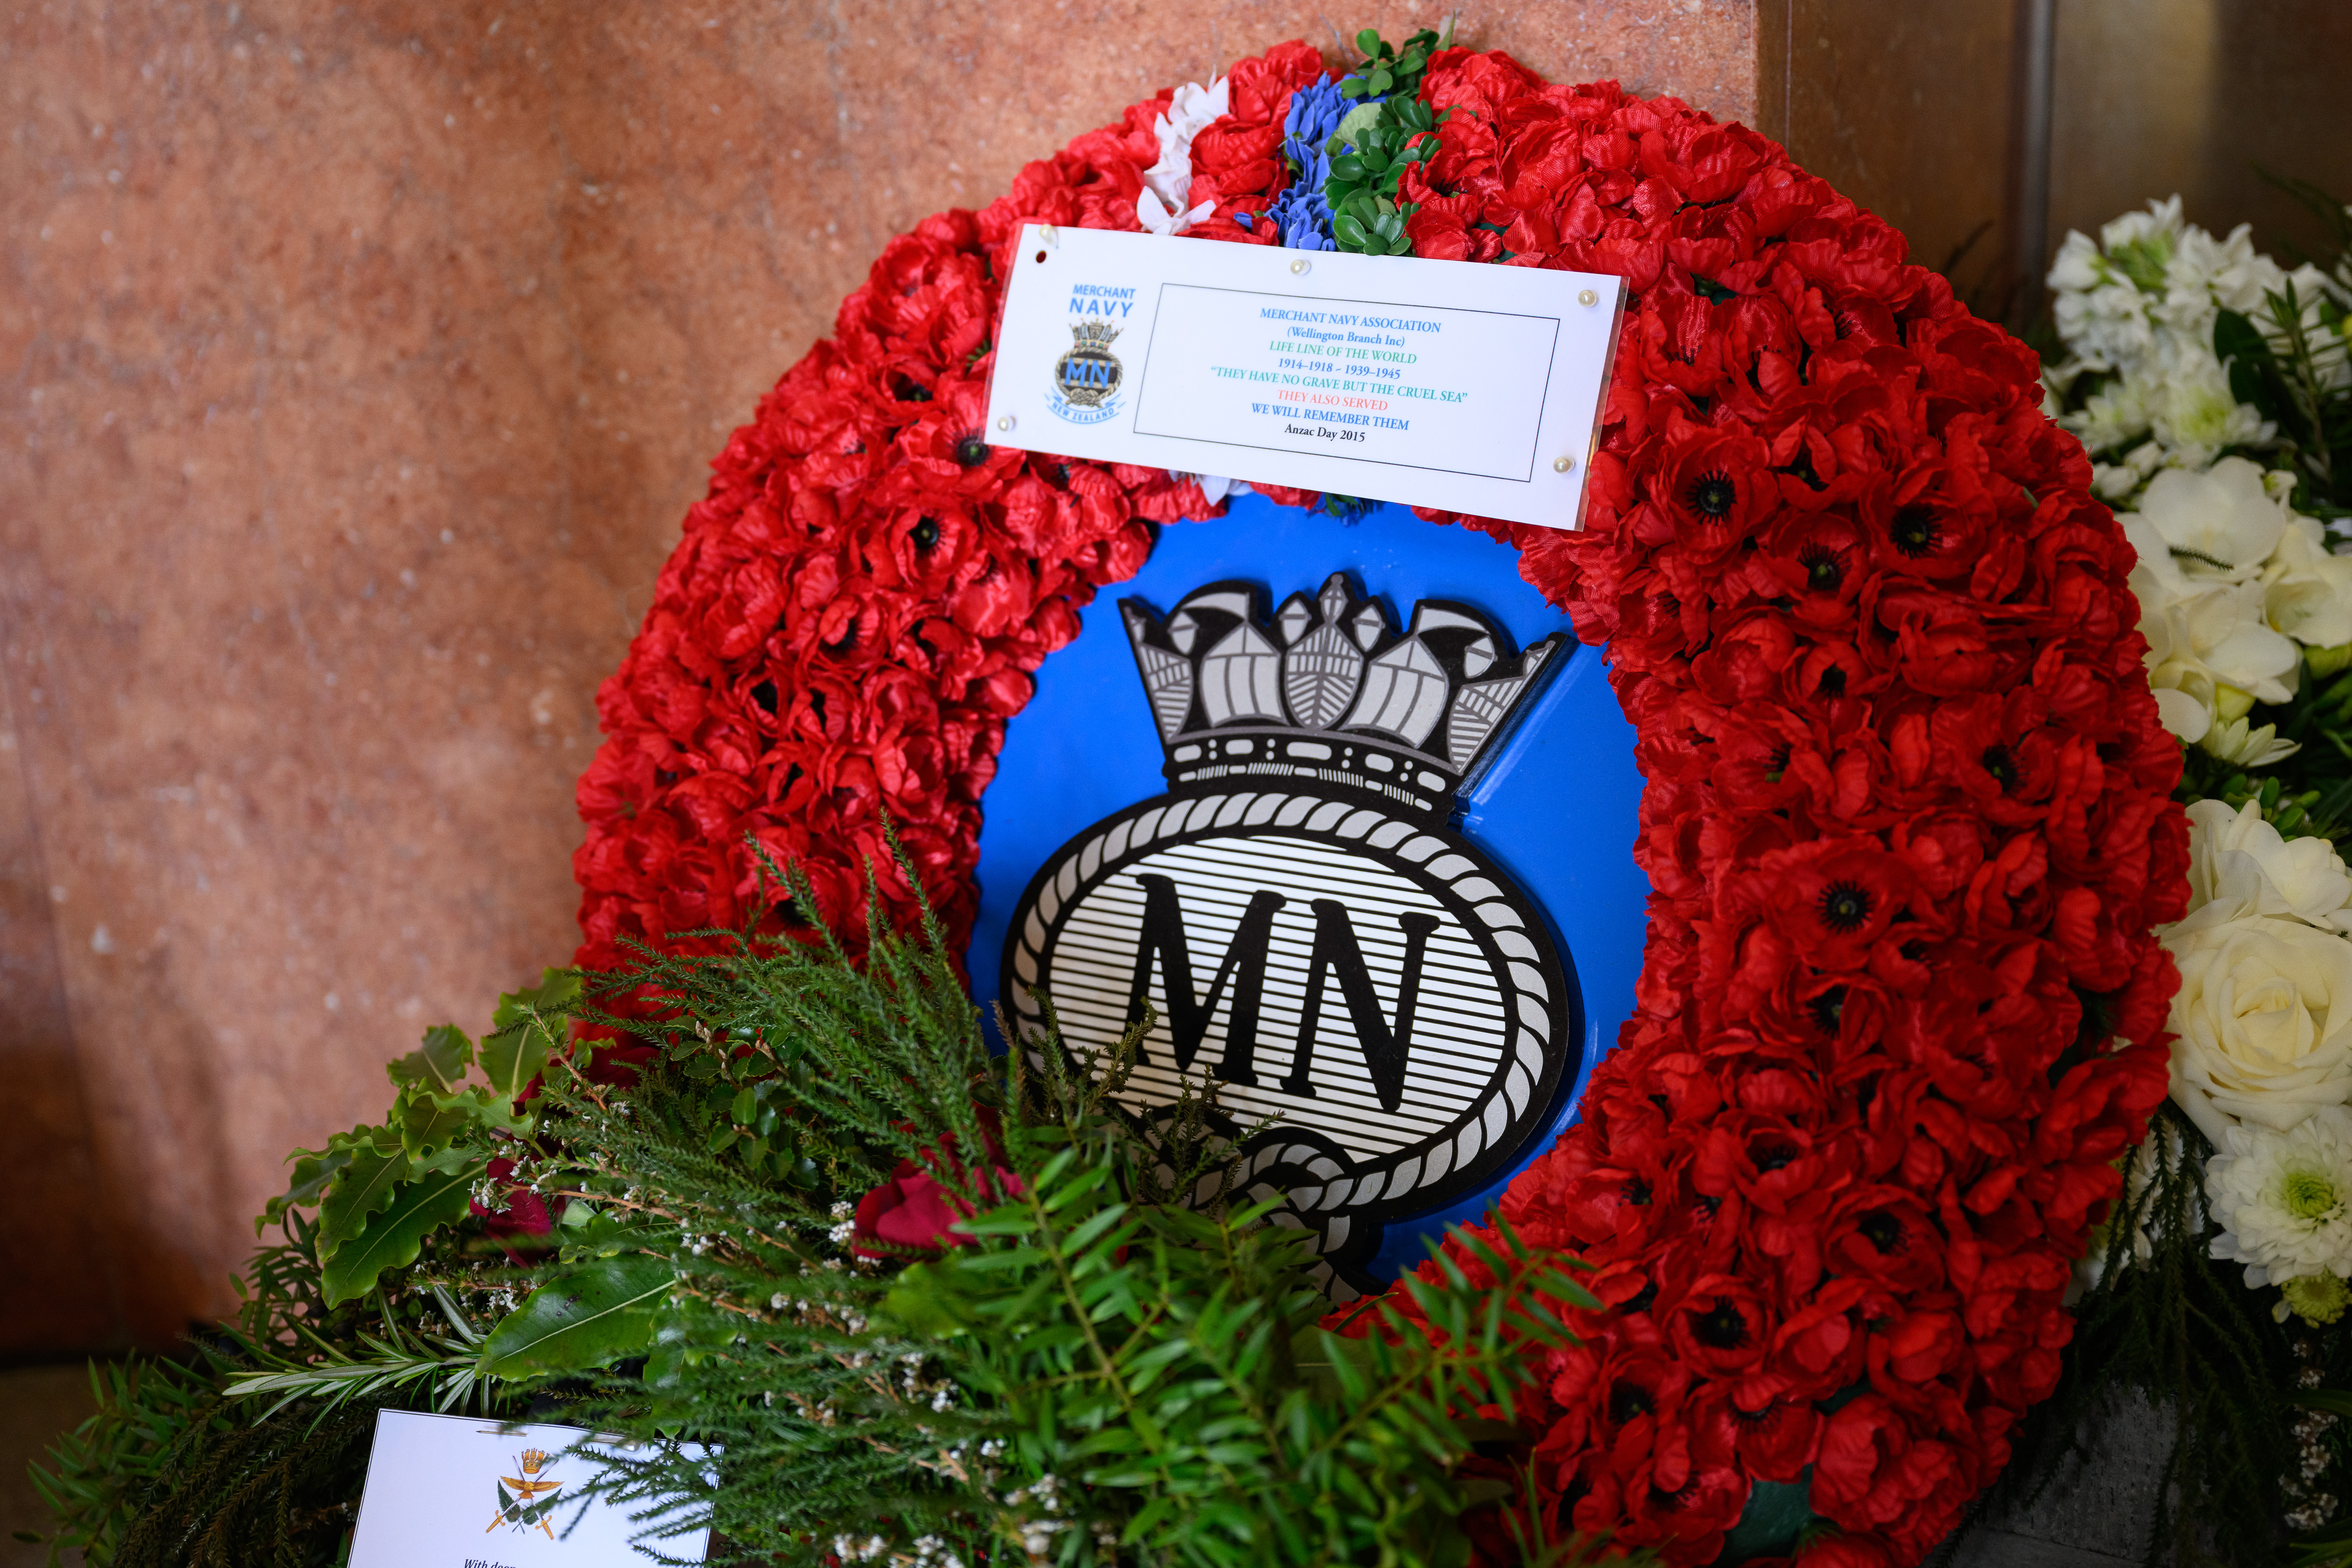 Wreath of red flowers with Merchant Navy insignia in the centre.